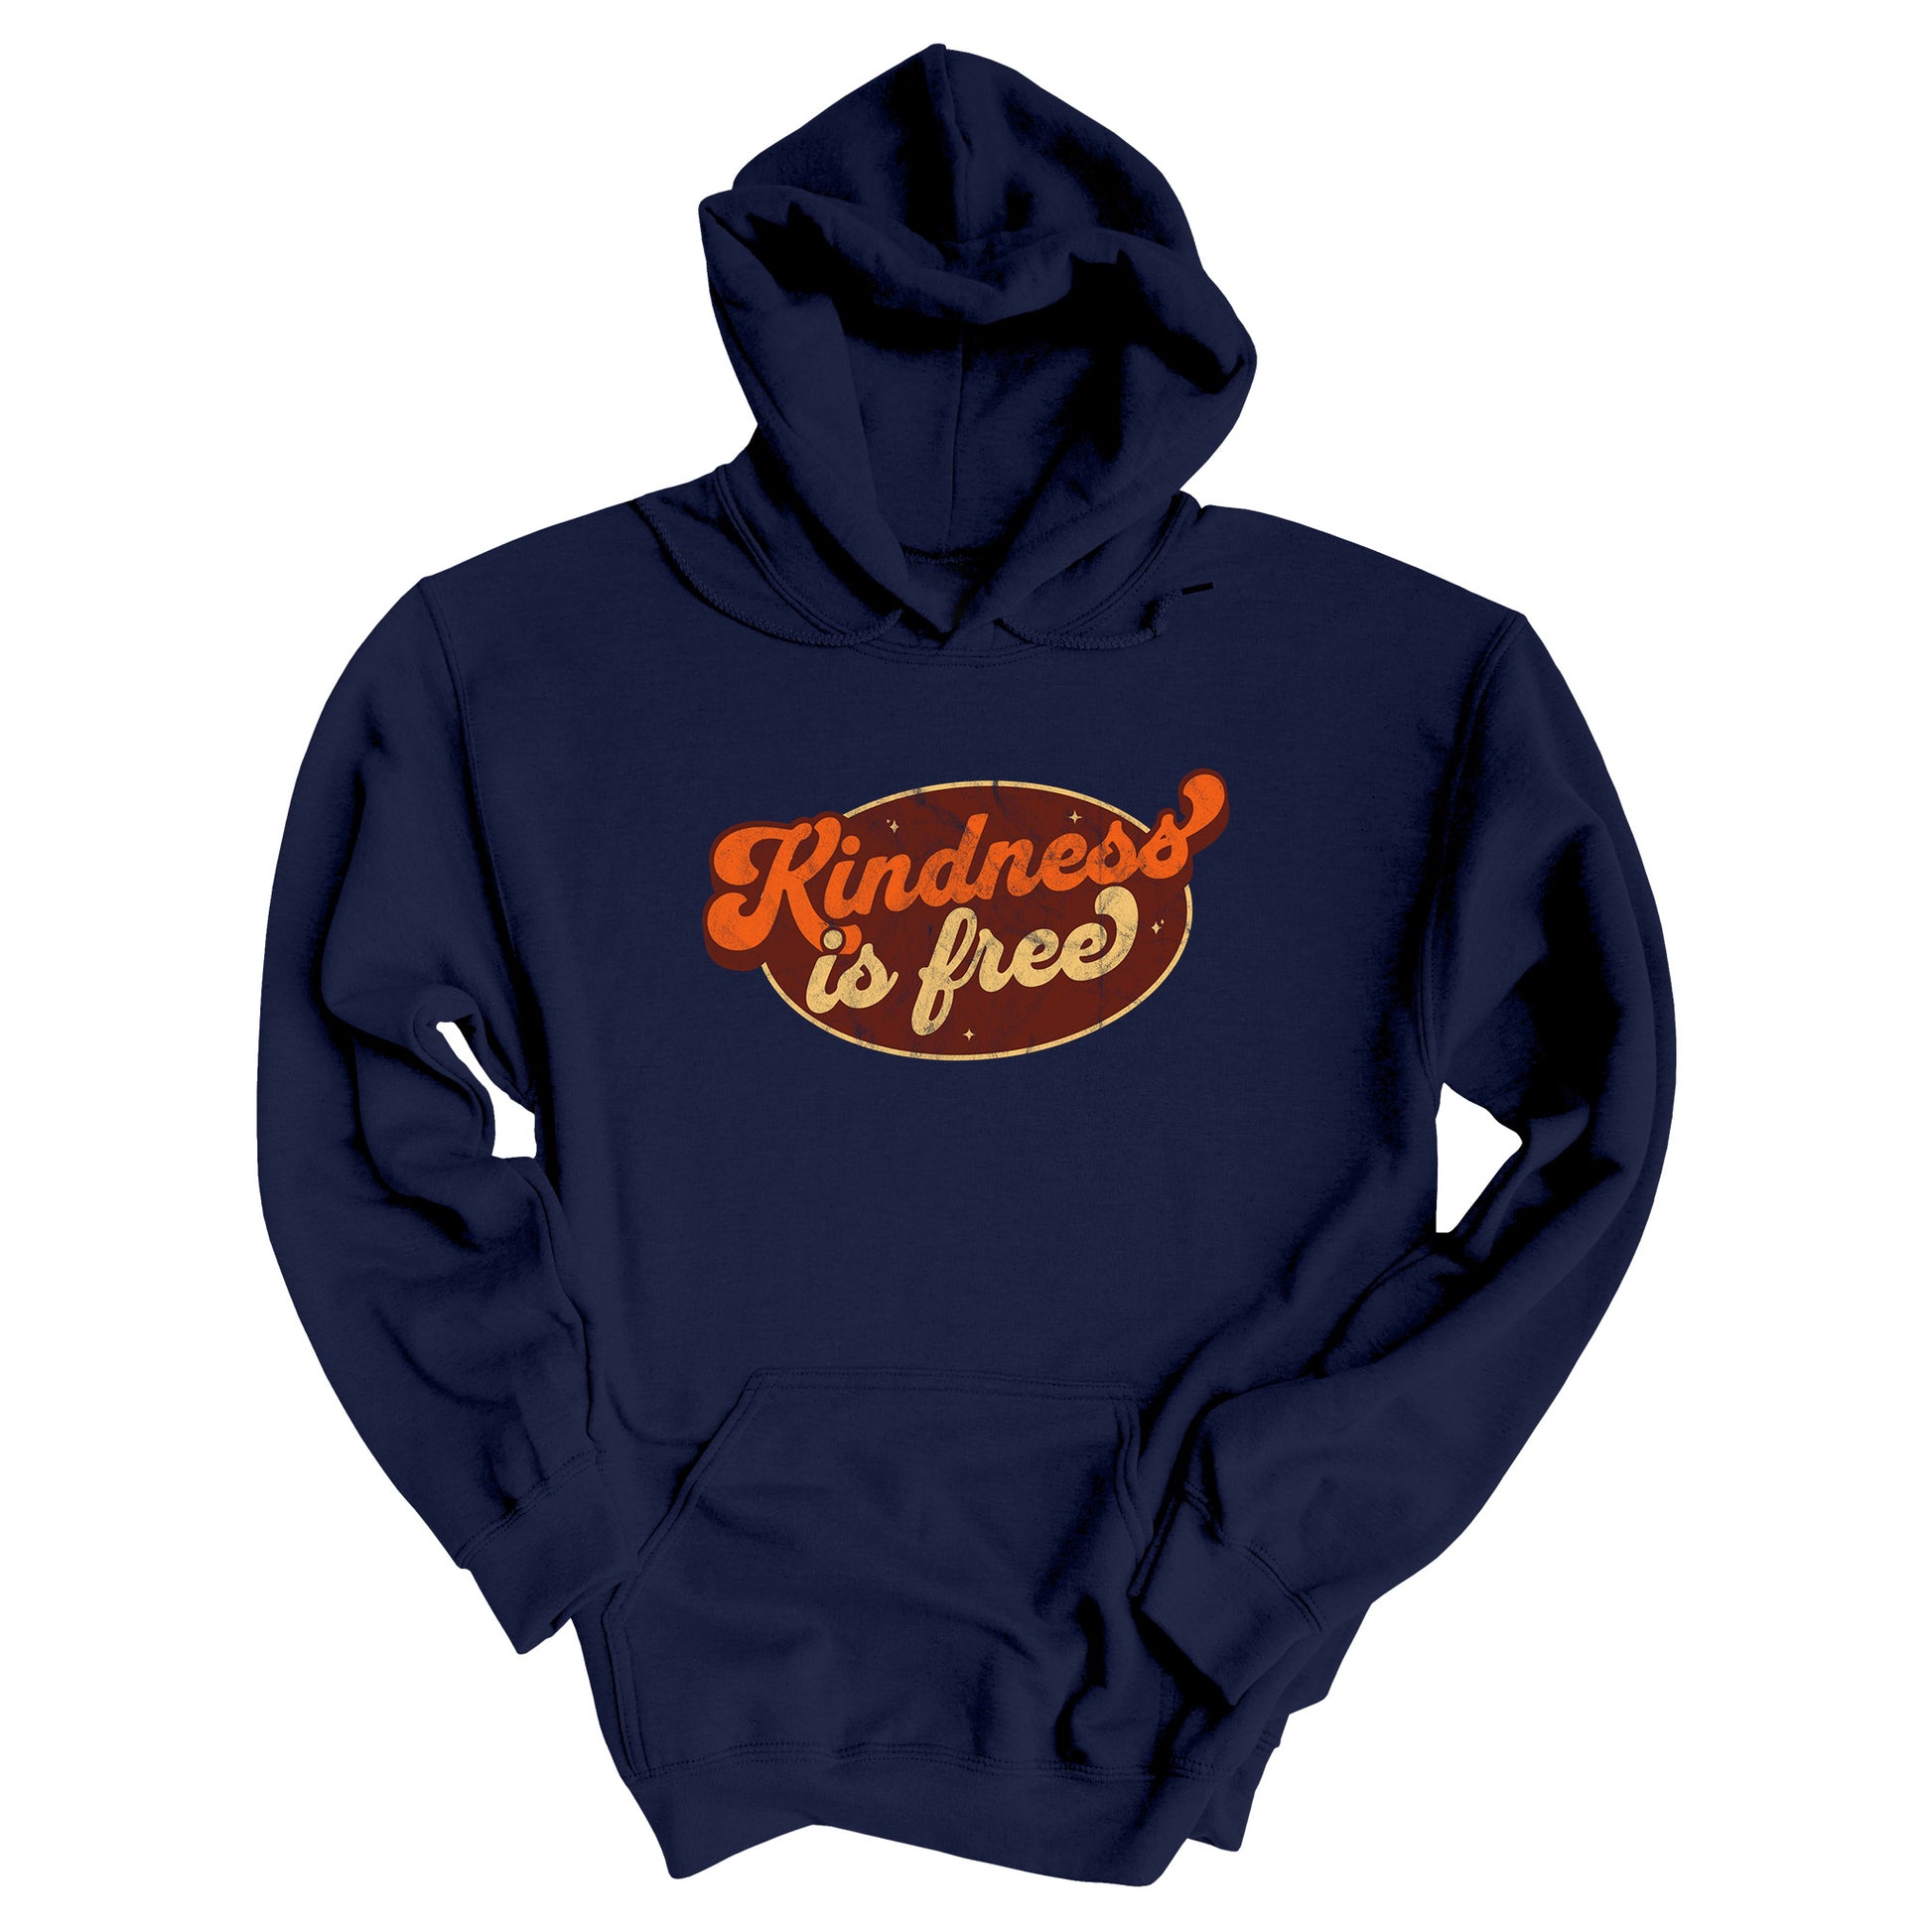 Navy Blue unisex hoodie with a retro graphic that says “Kindness is free.” The text is in a script font with a brown oval behind it. The “k” and the “s” in the word “Kindness” are not contained inside the oval. The graphic is also distressed to add to the retro feel.